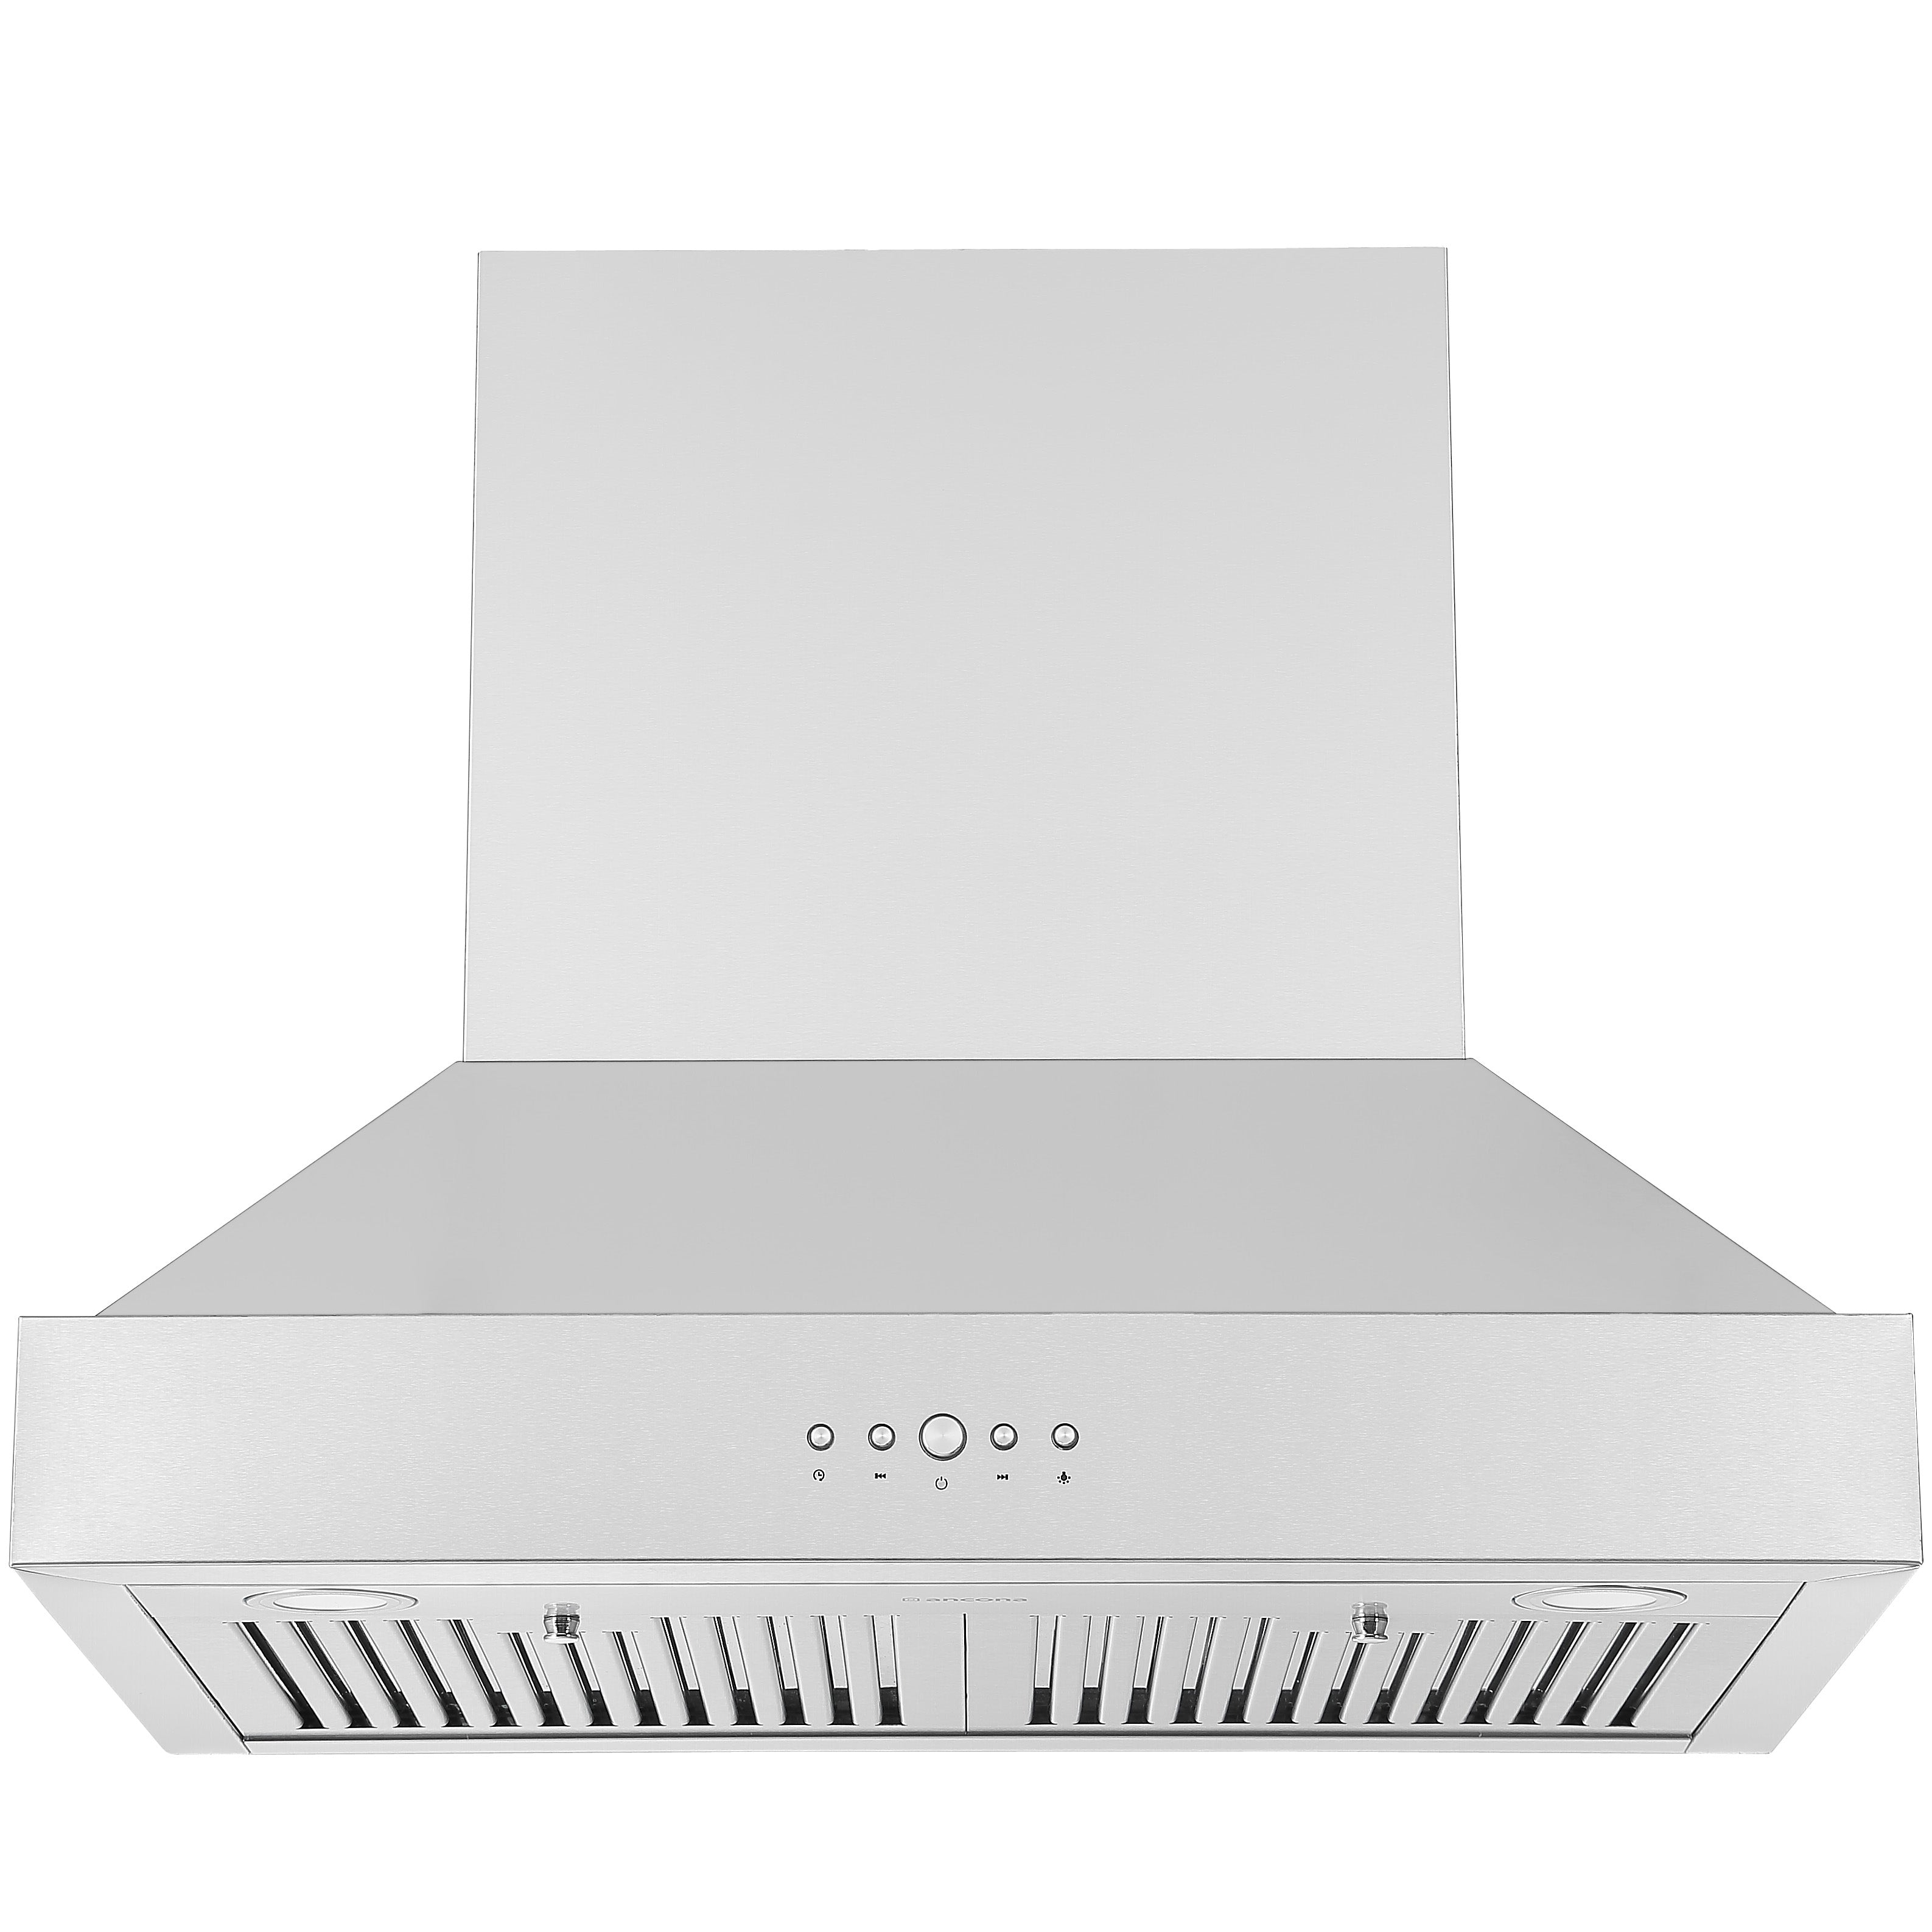 Ancona AN-1554 30 in. Pro Series Stainless Steel Wall-Mounted Pyramid Range Hood